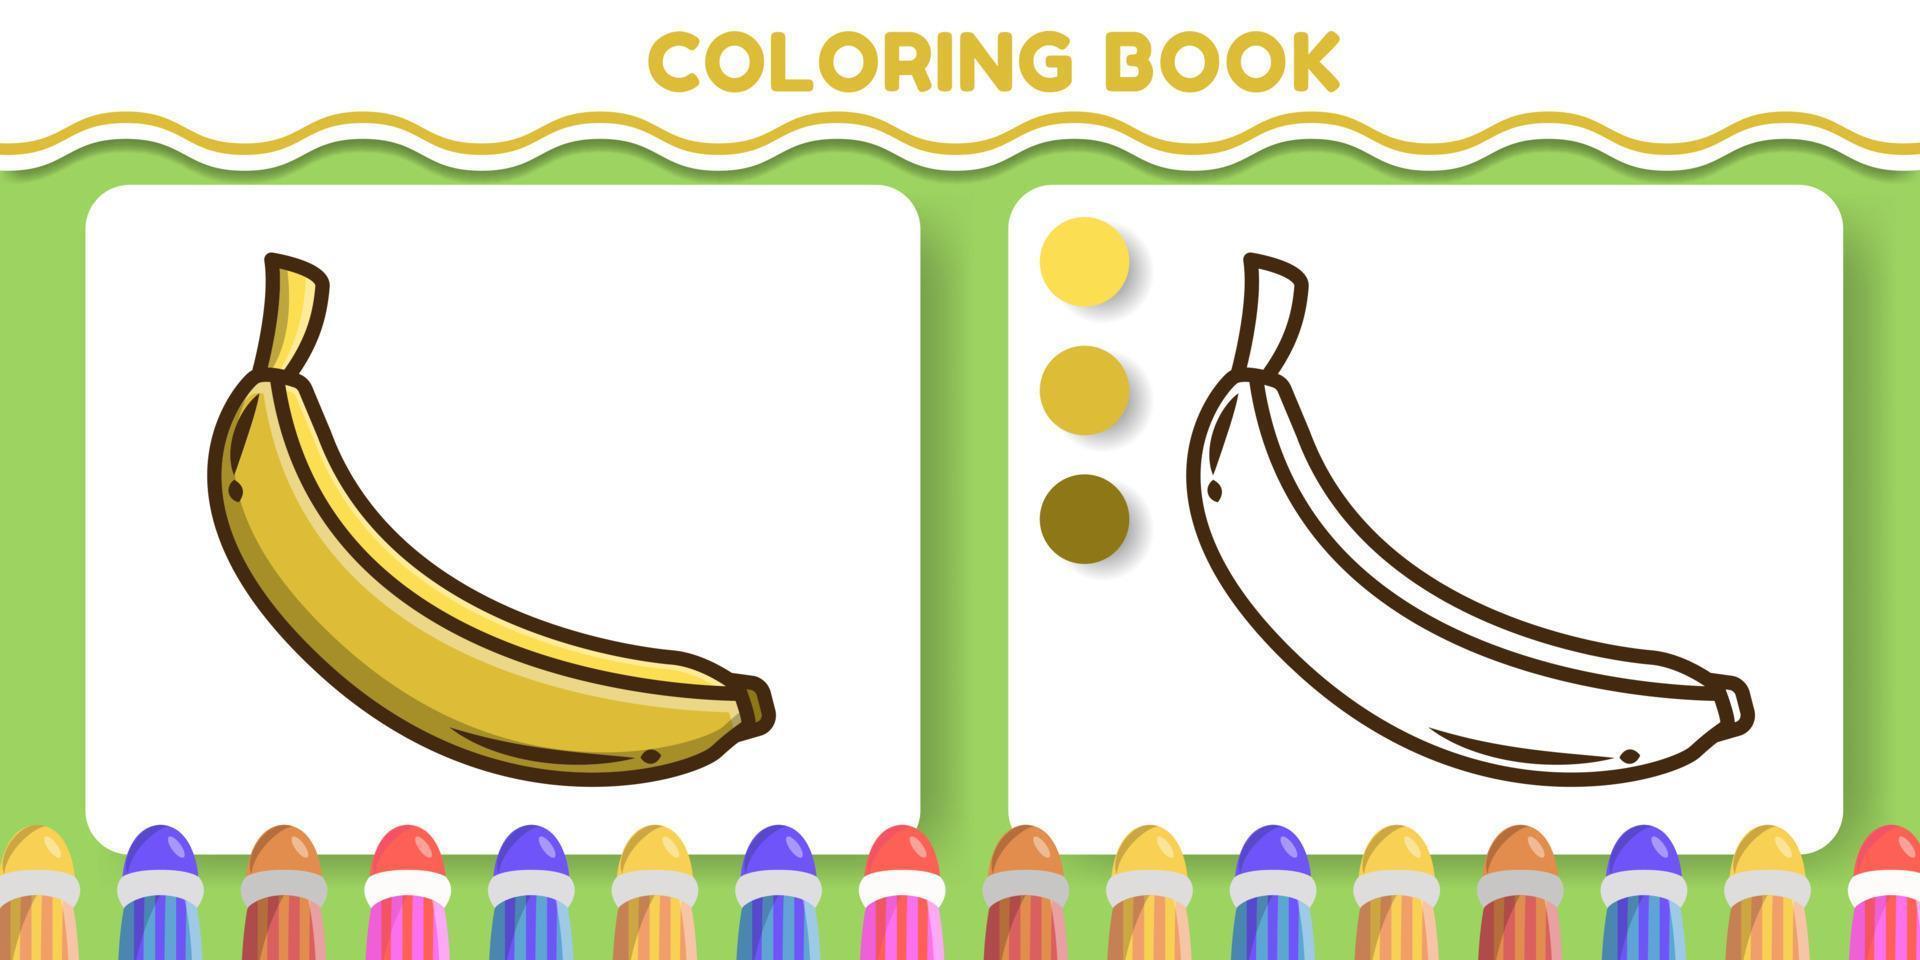 Colorful and black and white banana hand drawn cartoon doodle coloring book for kids vector